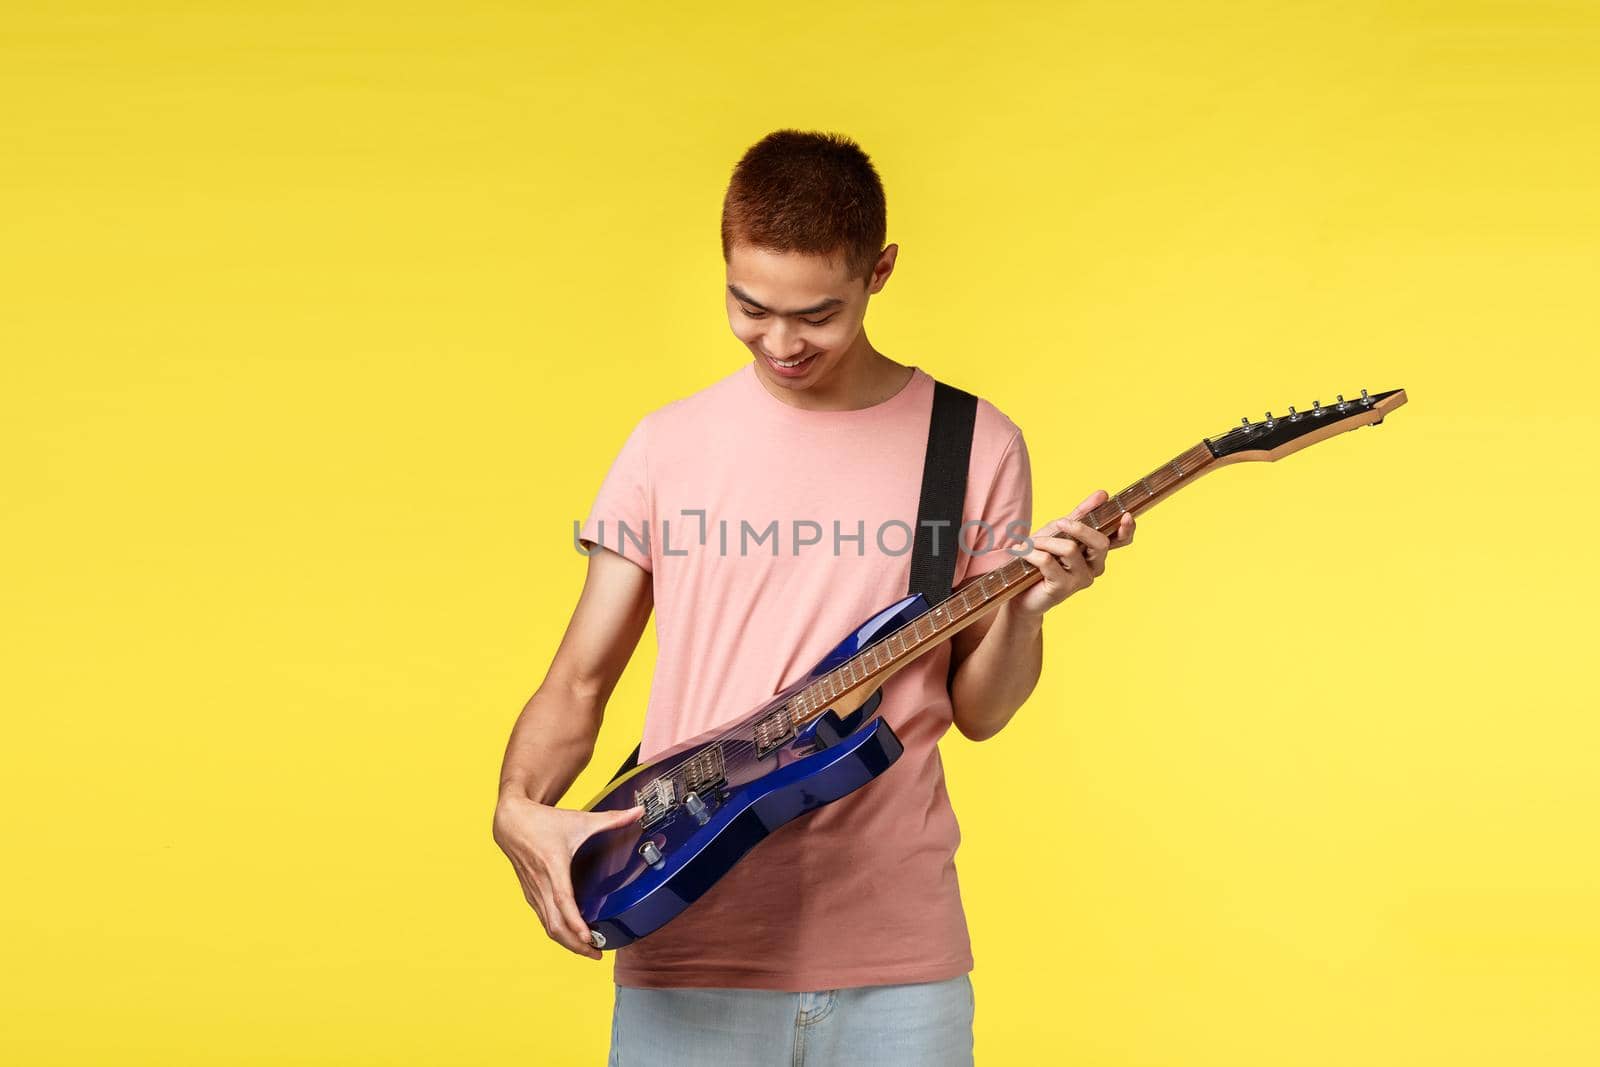 Lifestyle, leisure and youth concept. Portrait of enthusiastic asian guy receive new electric guitar as gift, smiling happy, look at intstrument satisfied and delighted, yellow background by Benzoix